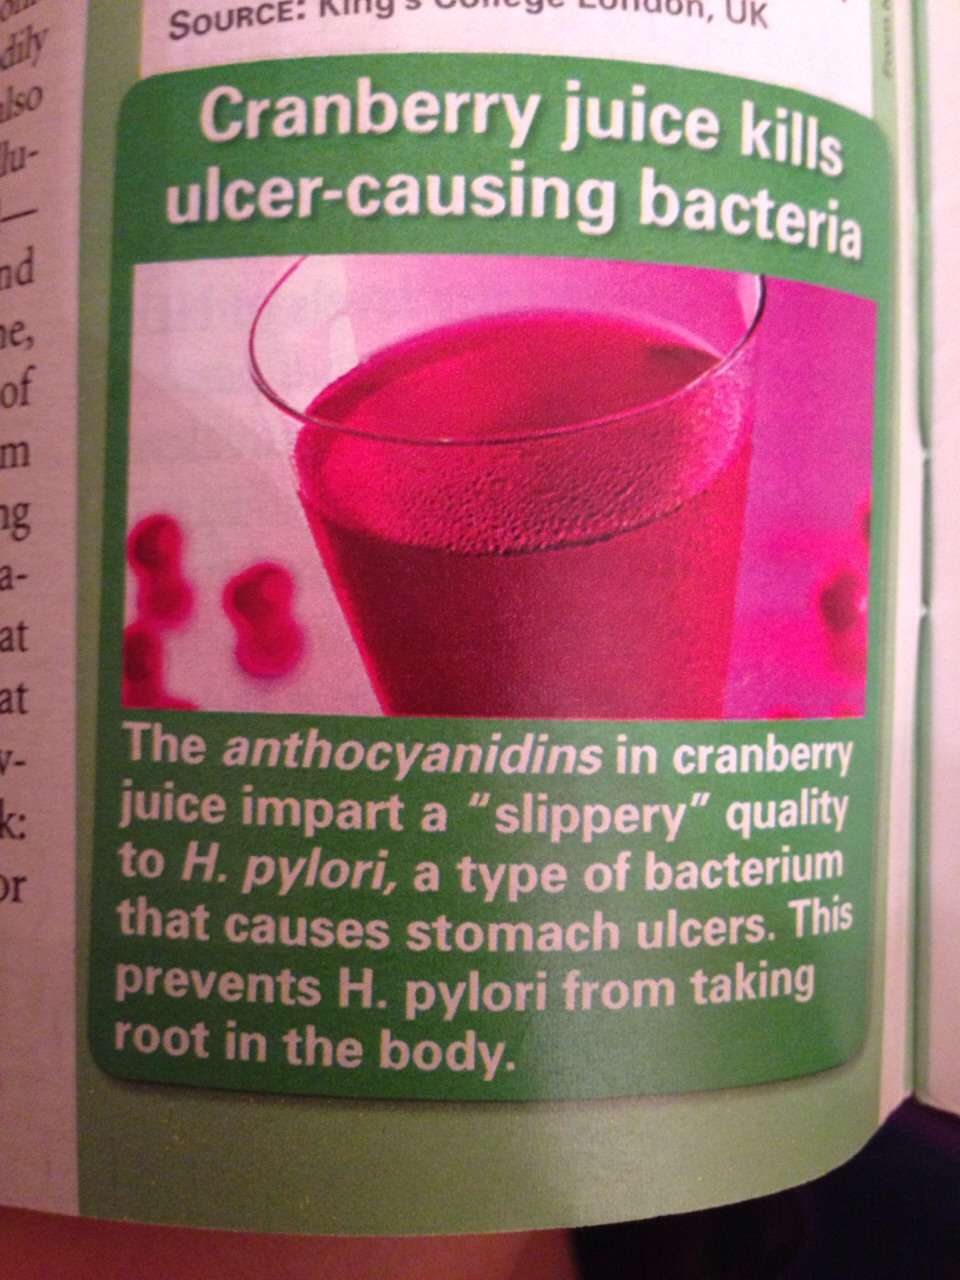 Drink Cranberry Juice To Prevent Stomach Ulcers.